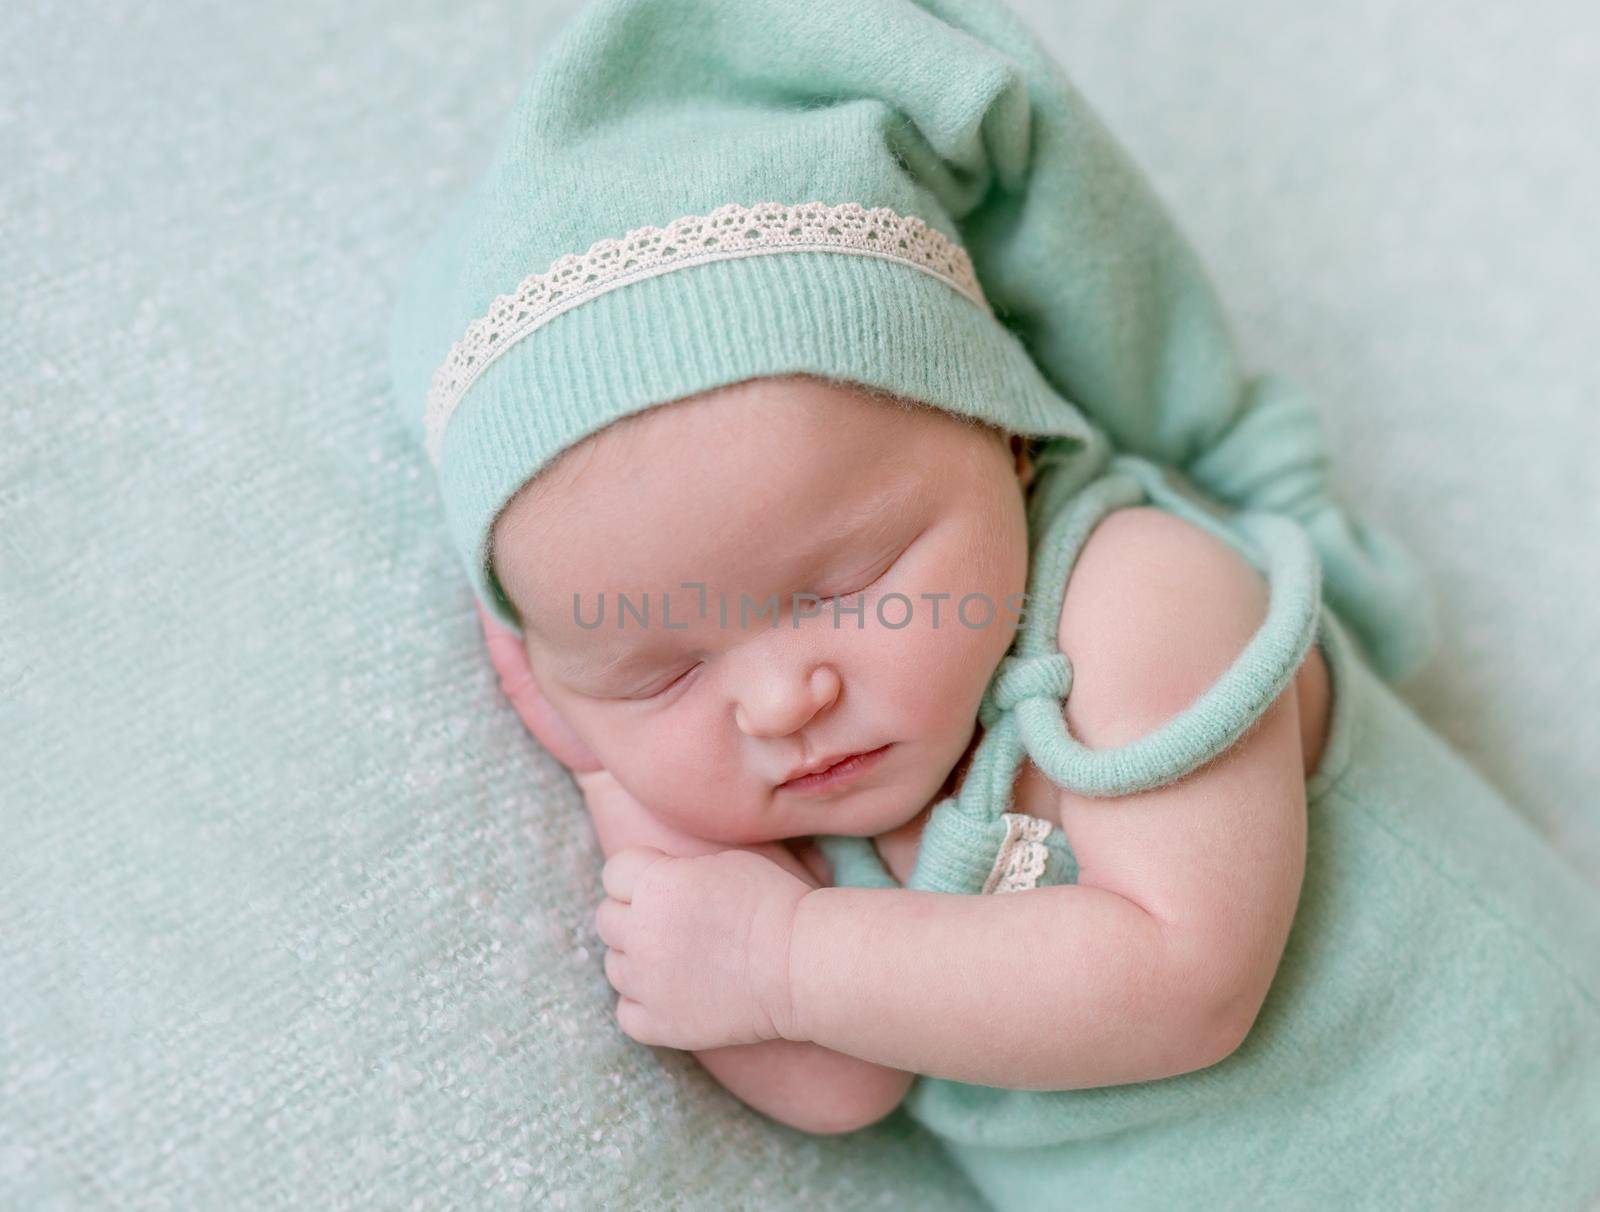 Cute girl sleeping on her side in green hat, wearing green small outfit, closeup